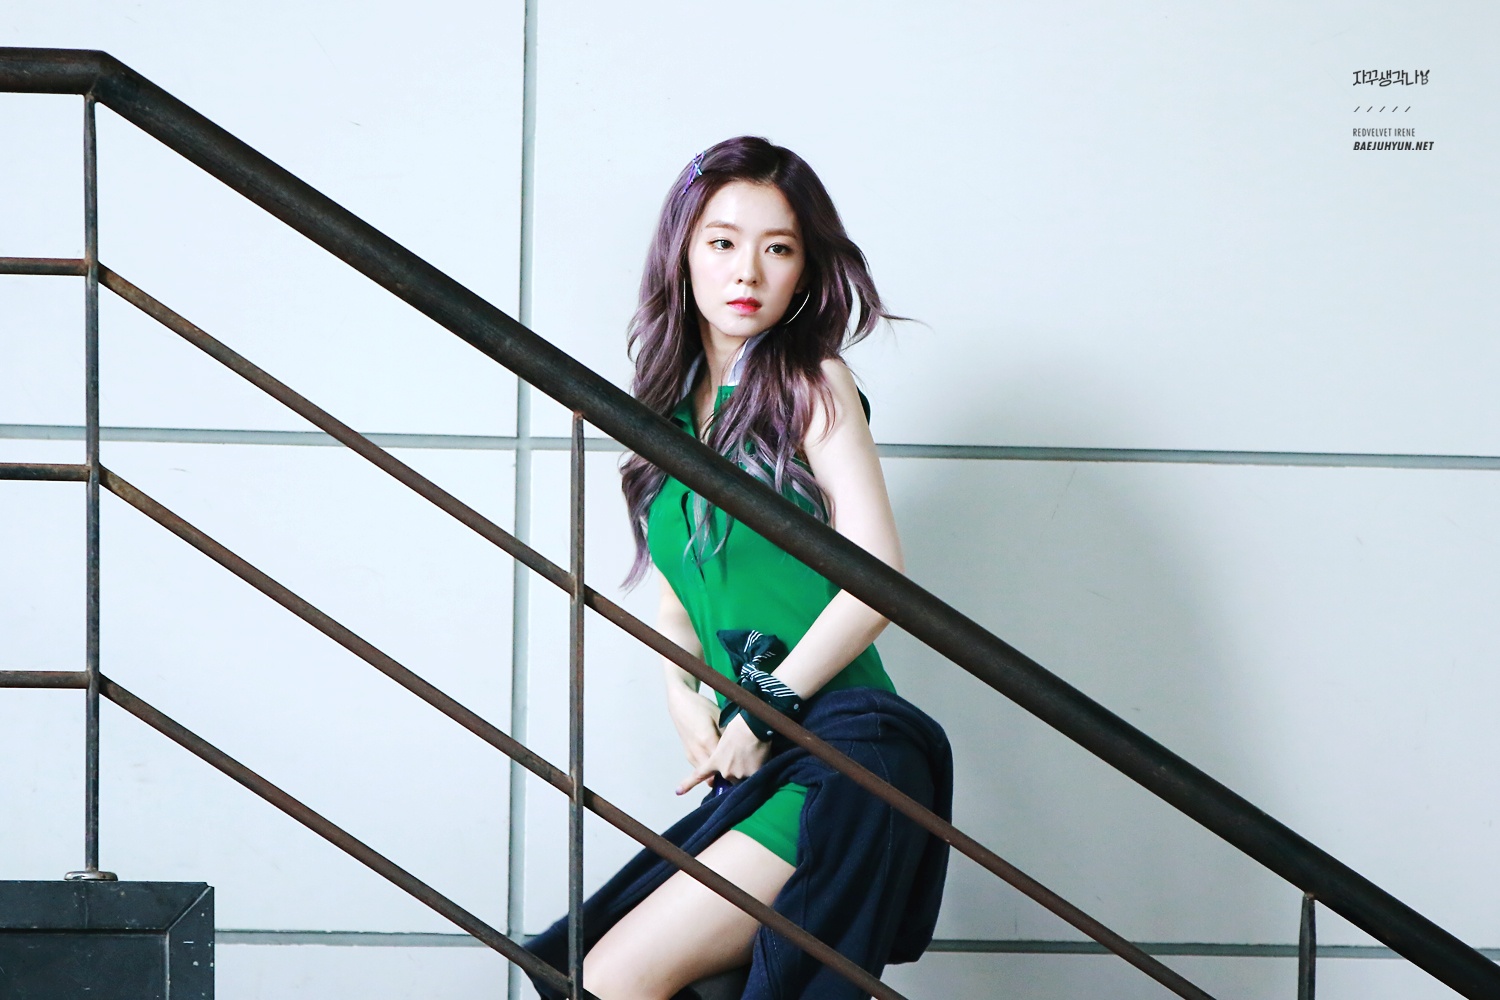 Fans capture photos of Irene looking gorgeous in short skirt - Koreaboo